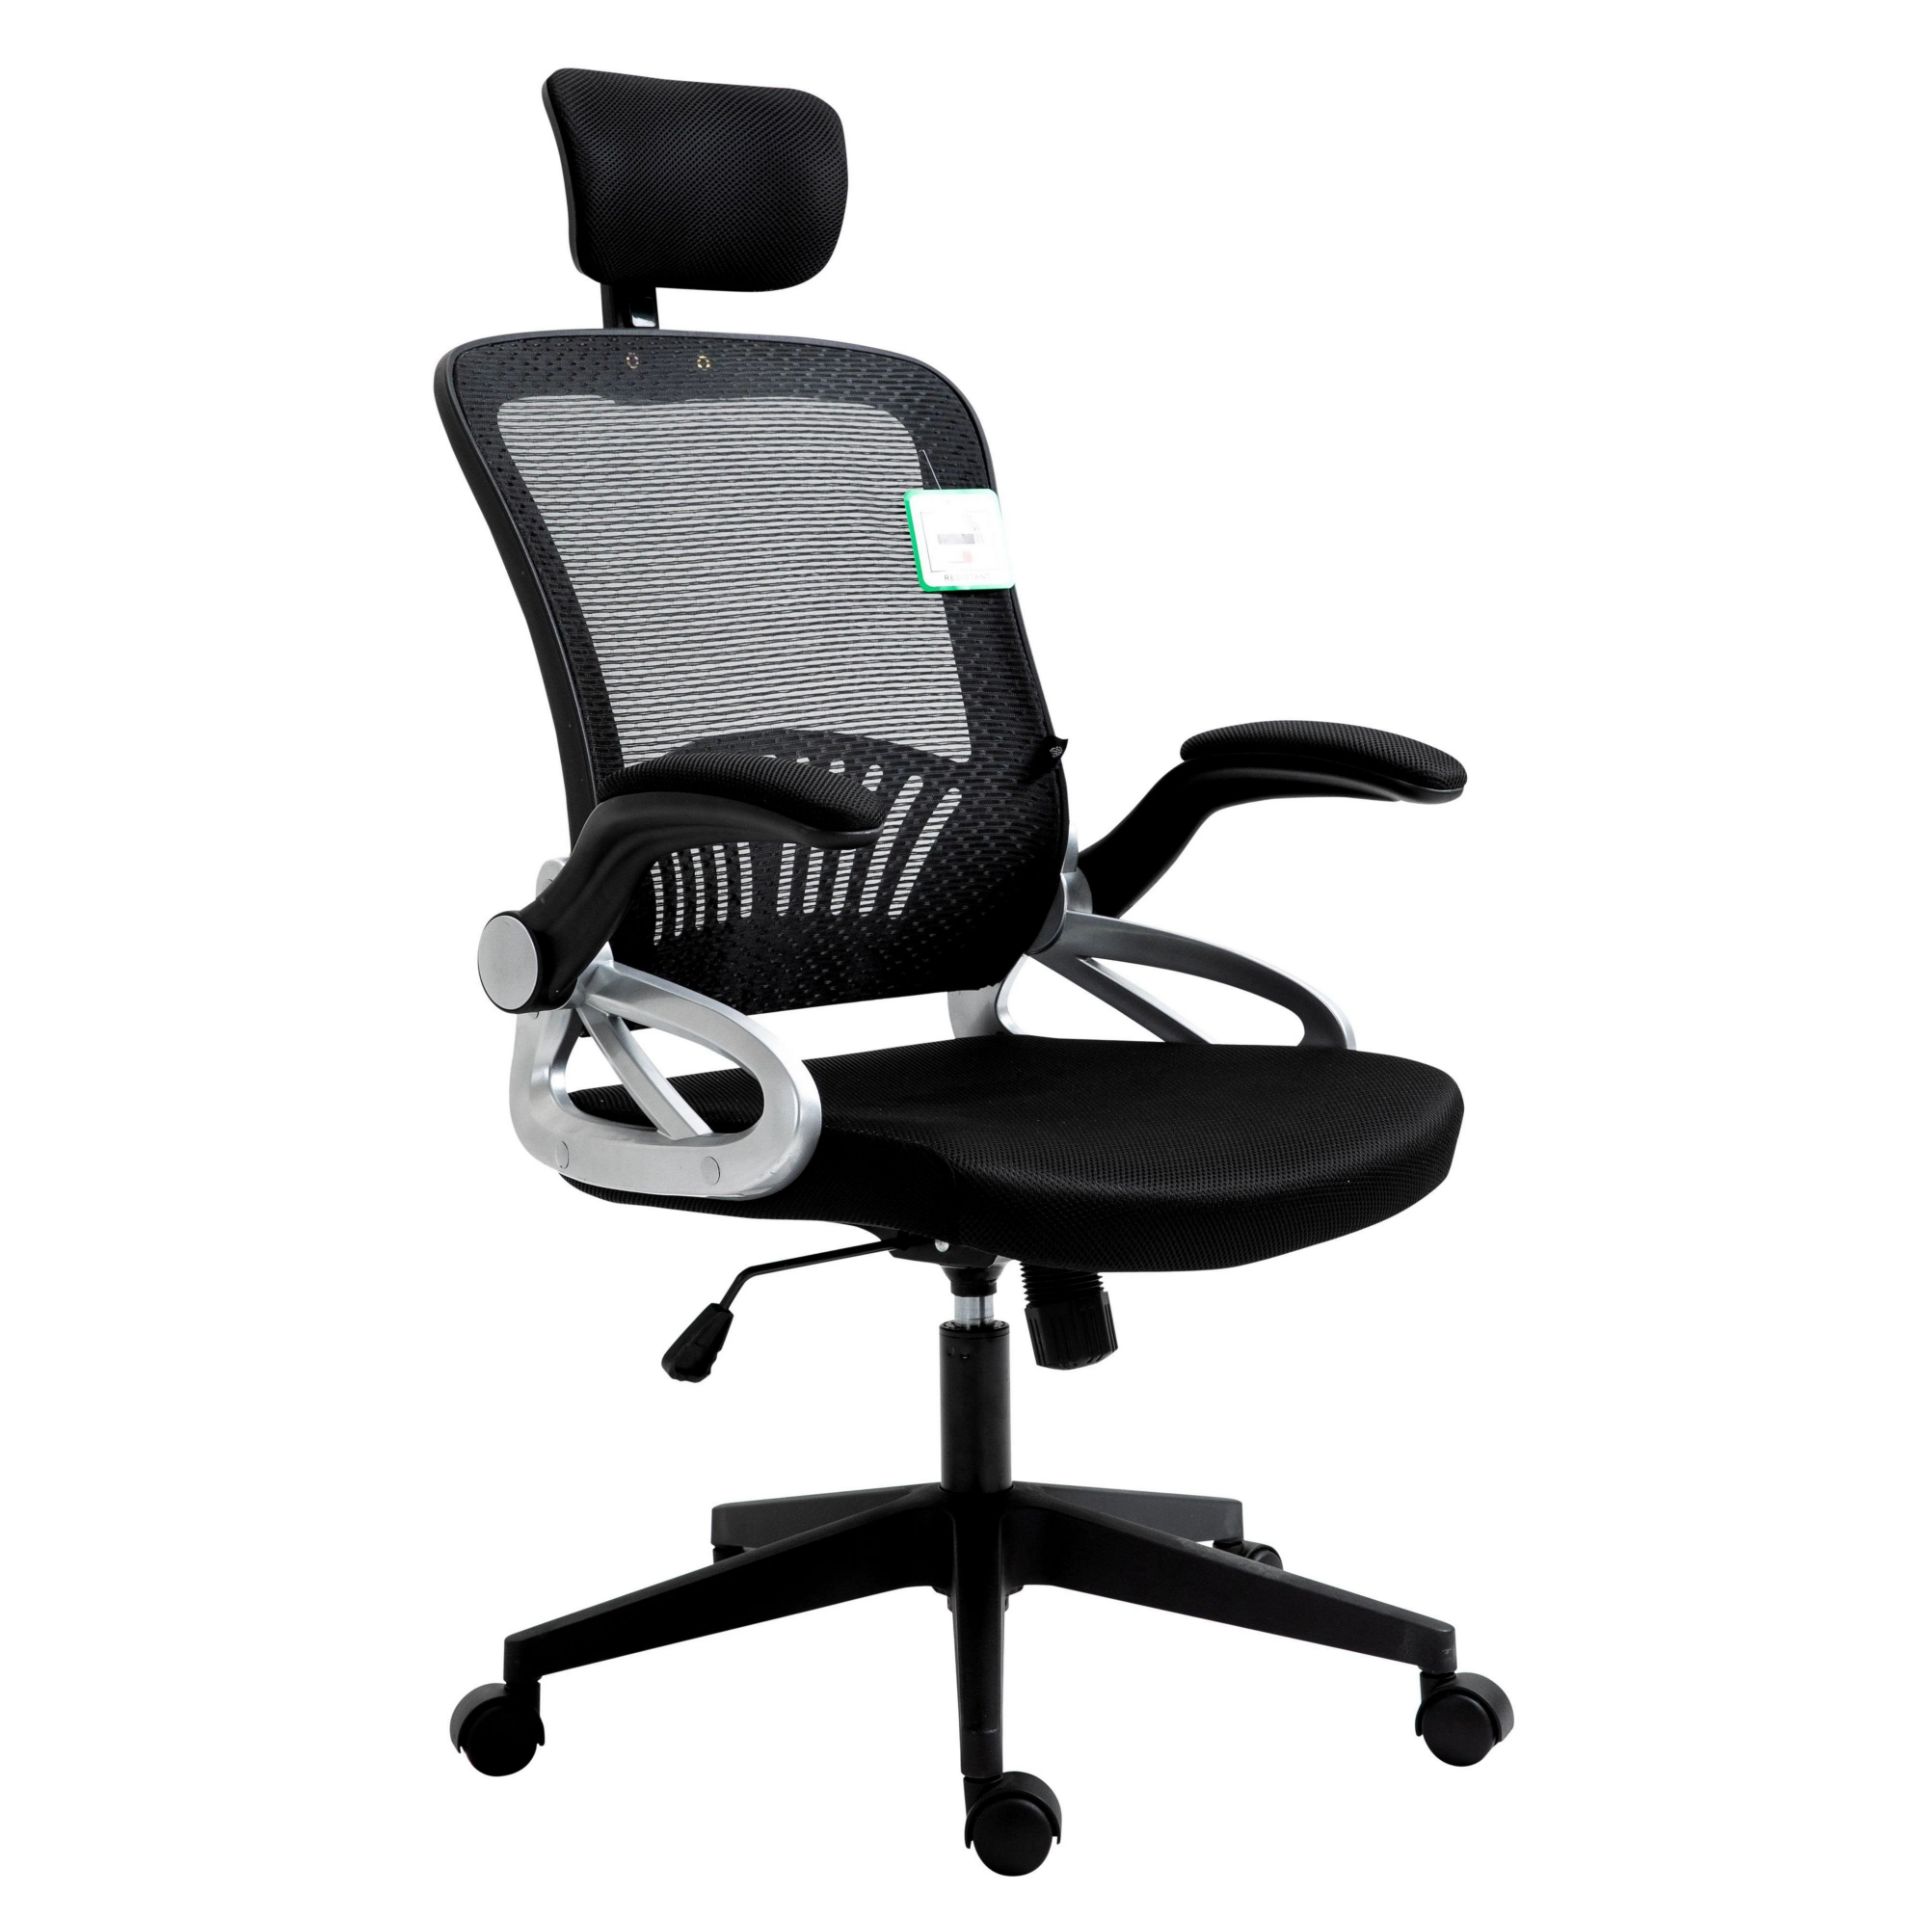 Mesh High Back Extra Padded Swivel Office Chair with Head Support & Adjustable Arms, Black.- R19.